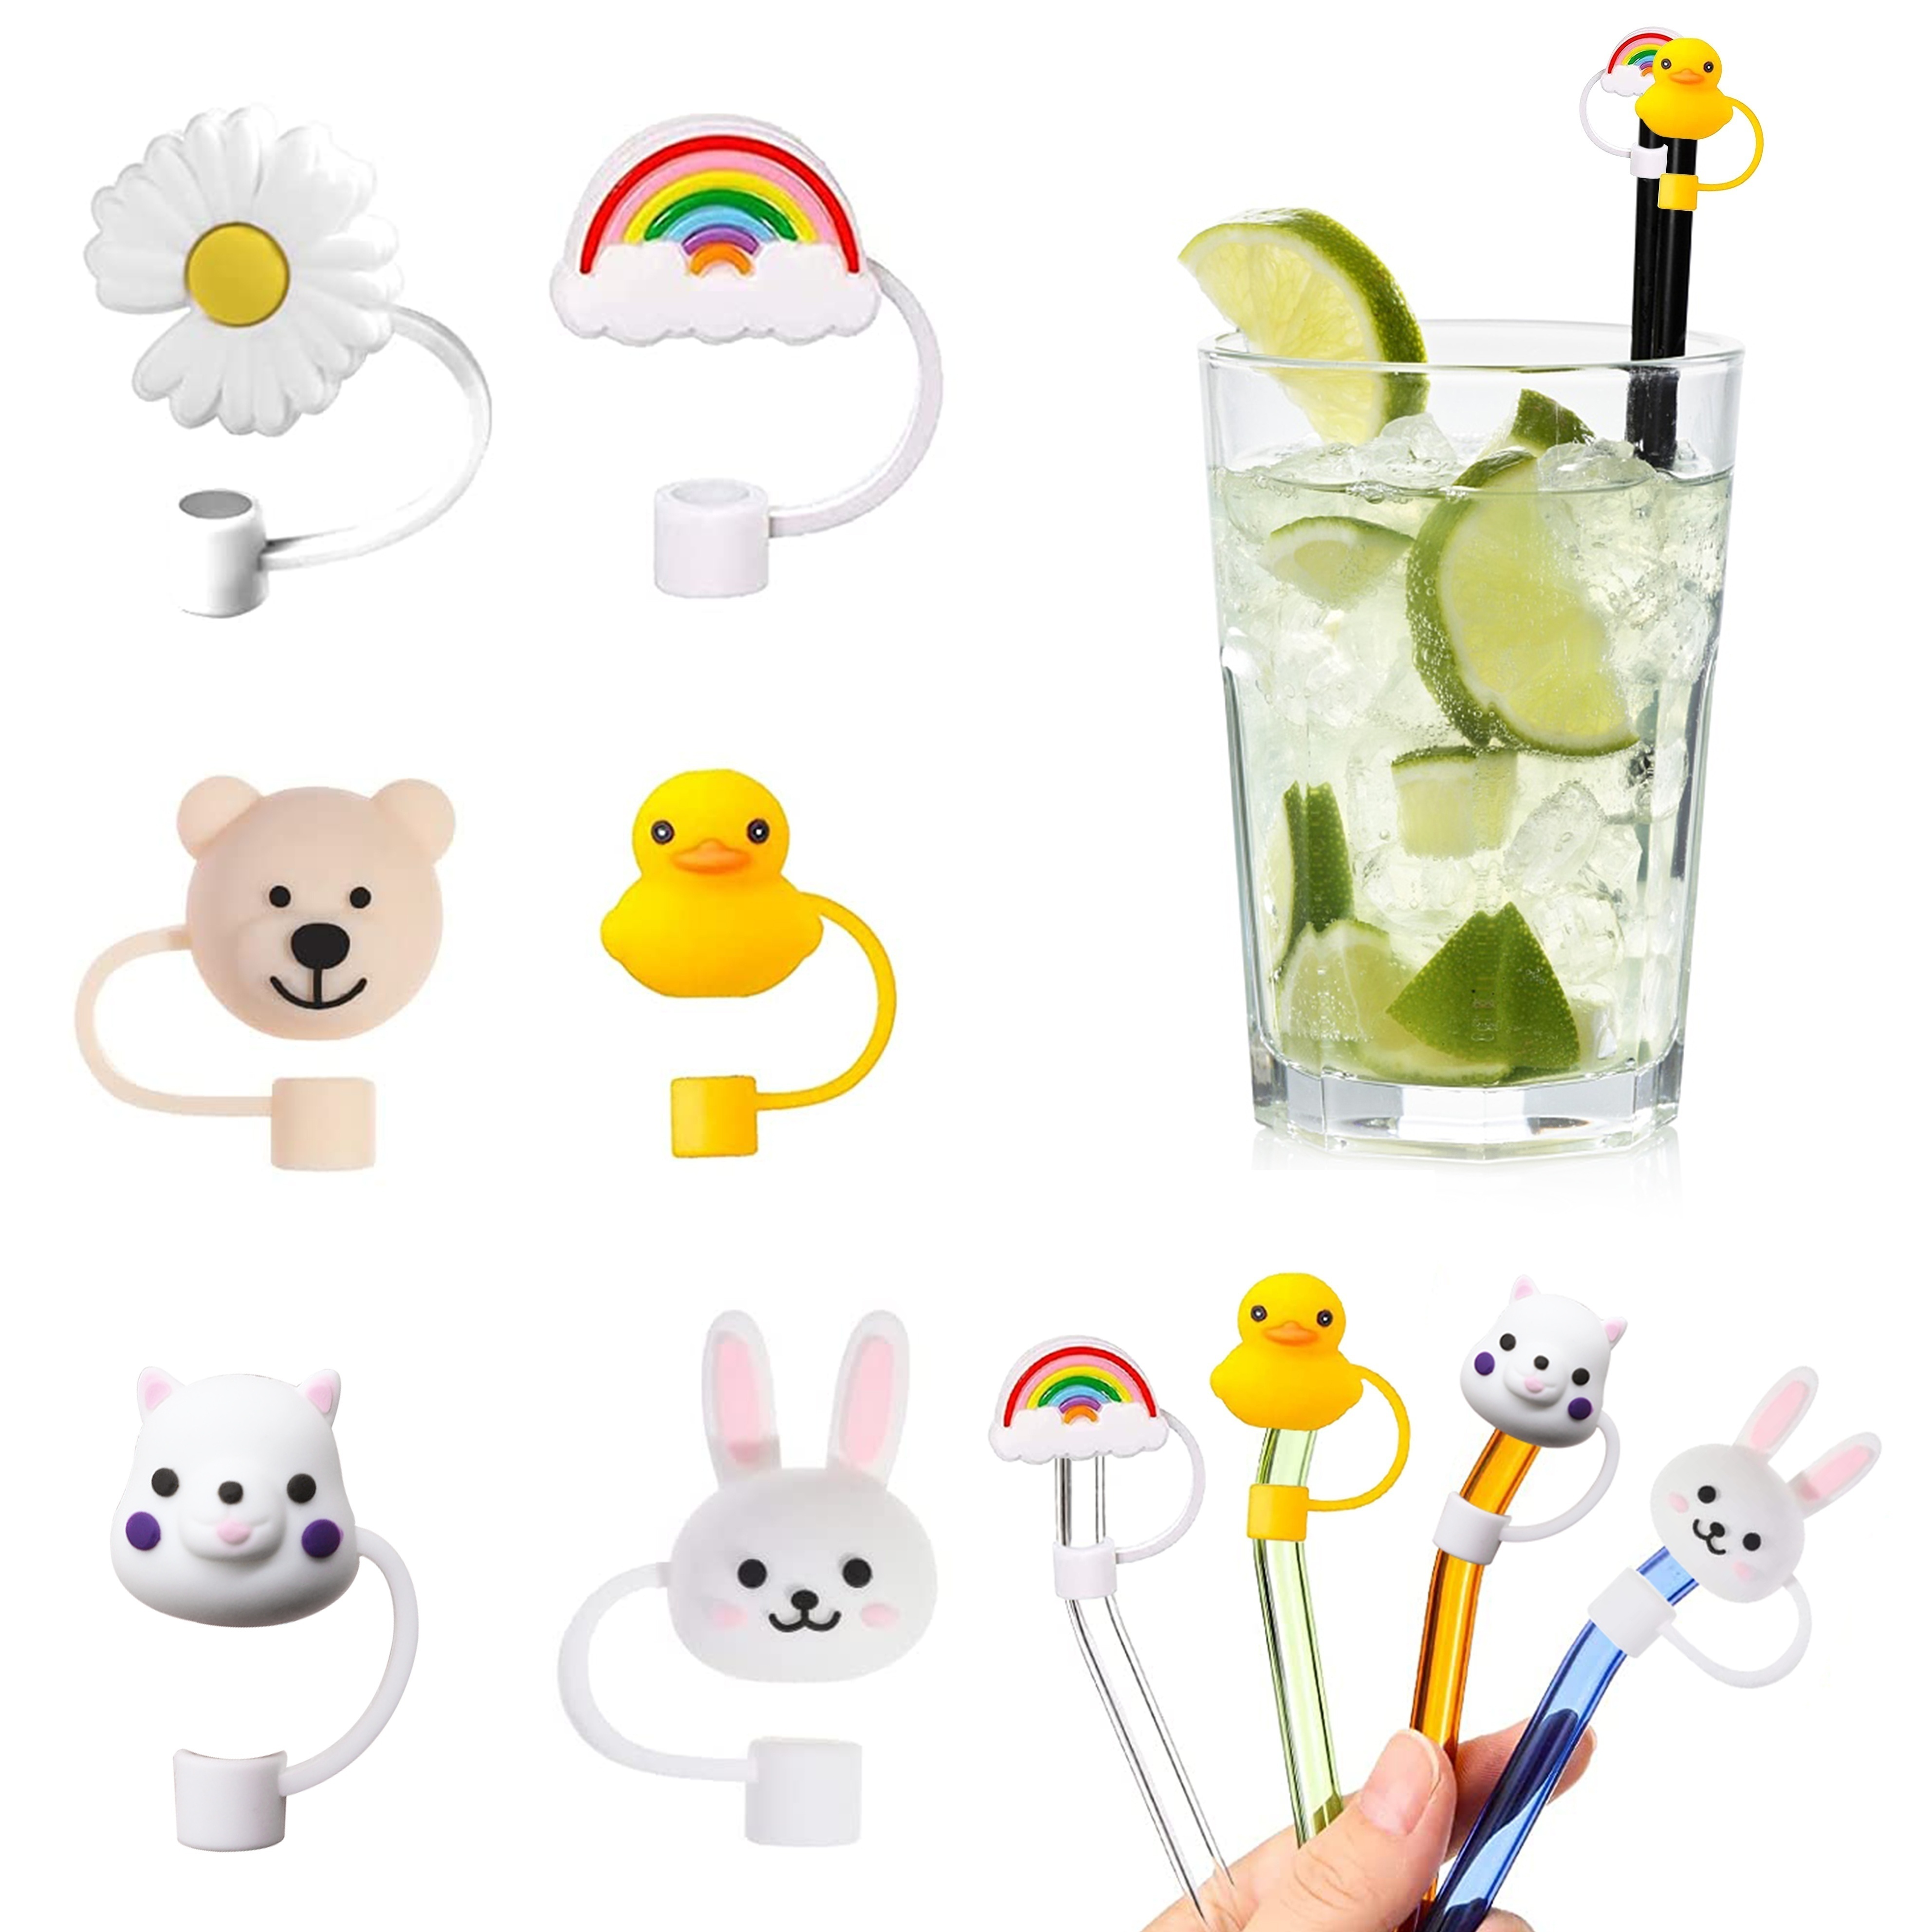  24 Pcs Straw Covers Caps Silicone Straw Tips Cover Reusable  Drinking Straw Tips Lids Cute Cartoon Anti-dust Straw Plug for 6mm Straws  Splash Proof Home Kitchen Accessories (not Include Straw) 